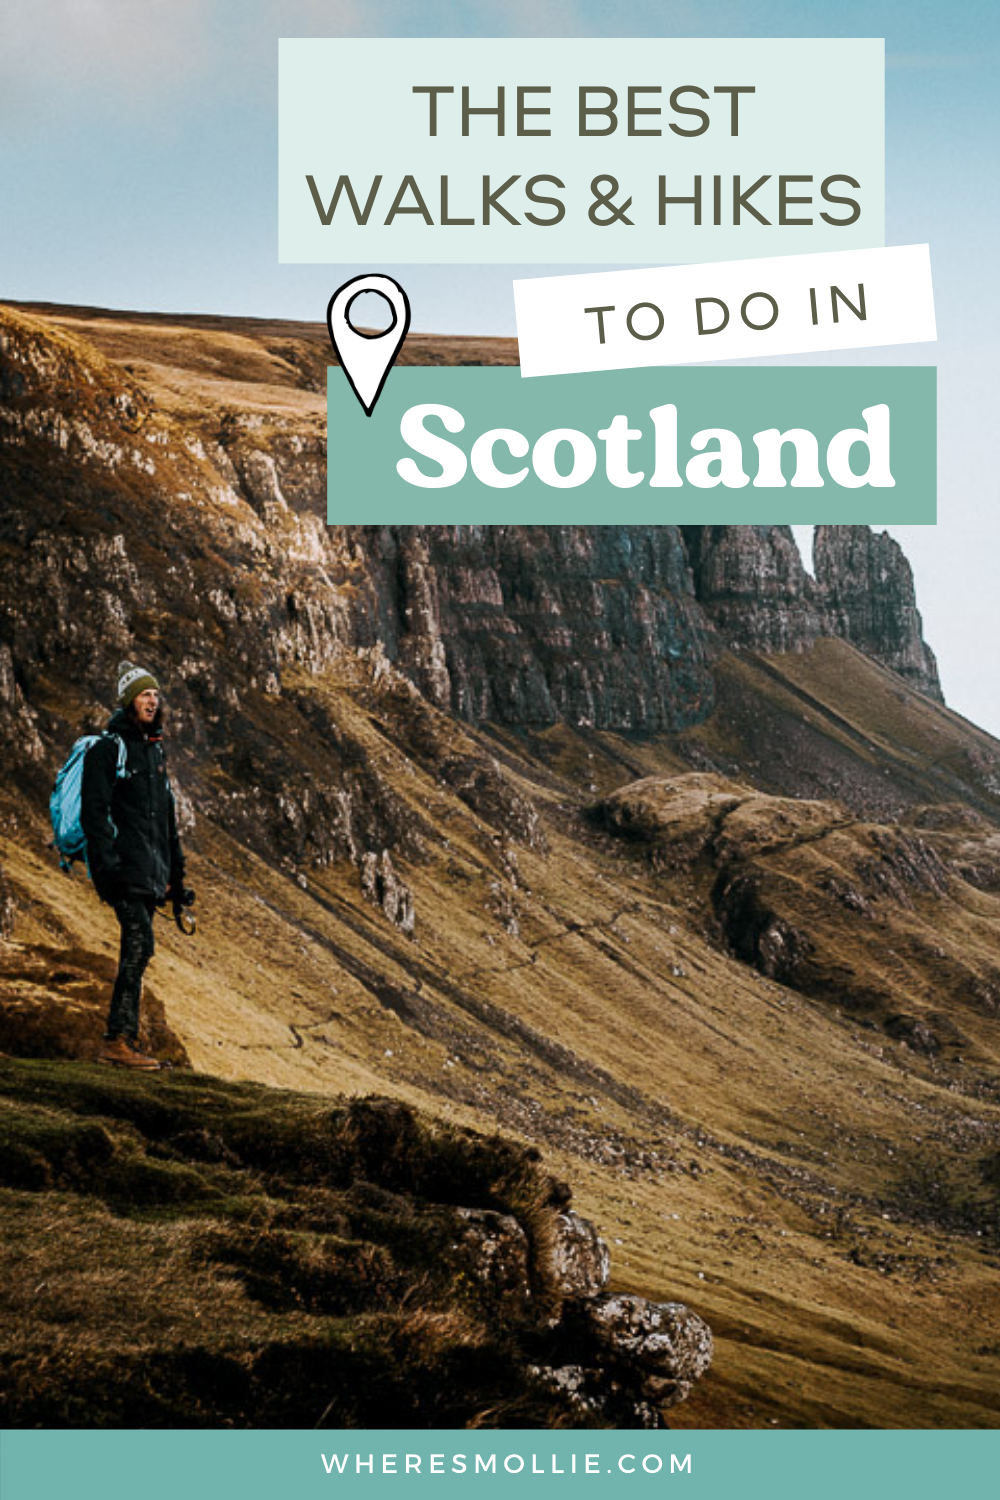 The best walks and hikes in Scotland